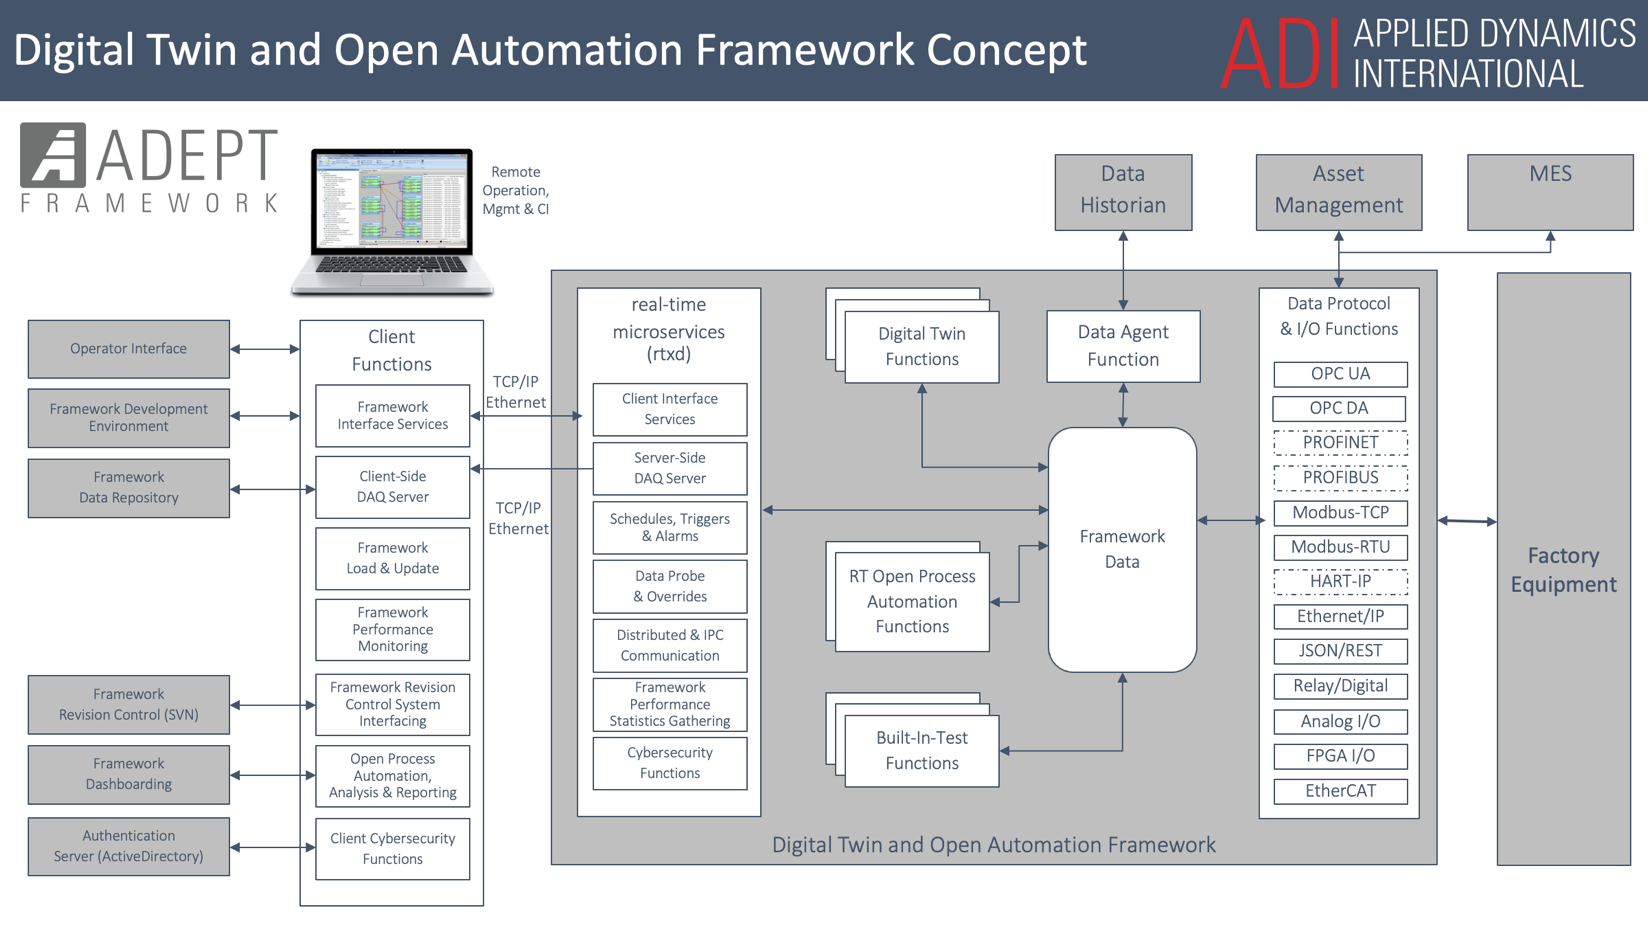 Digital Twin and Open Automation Framework Concept